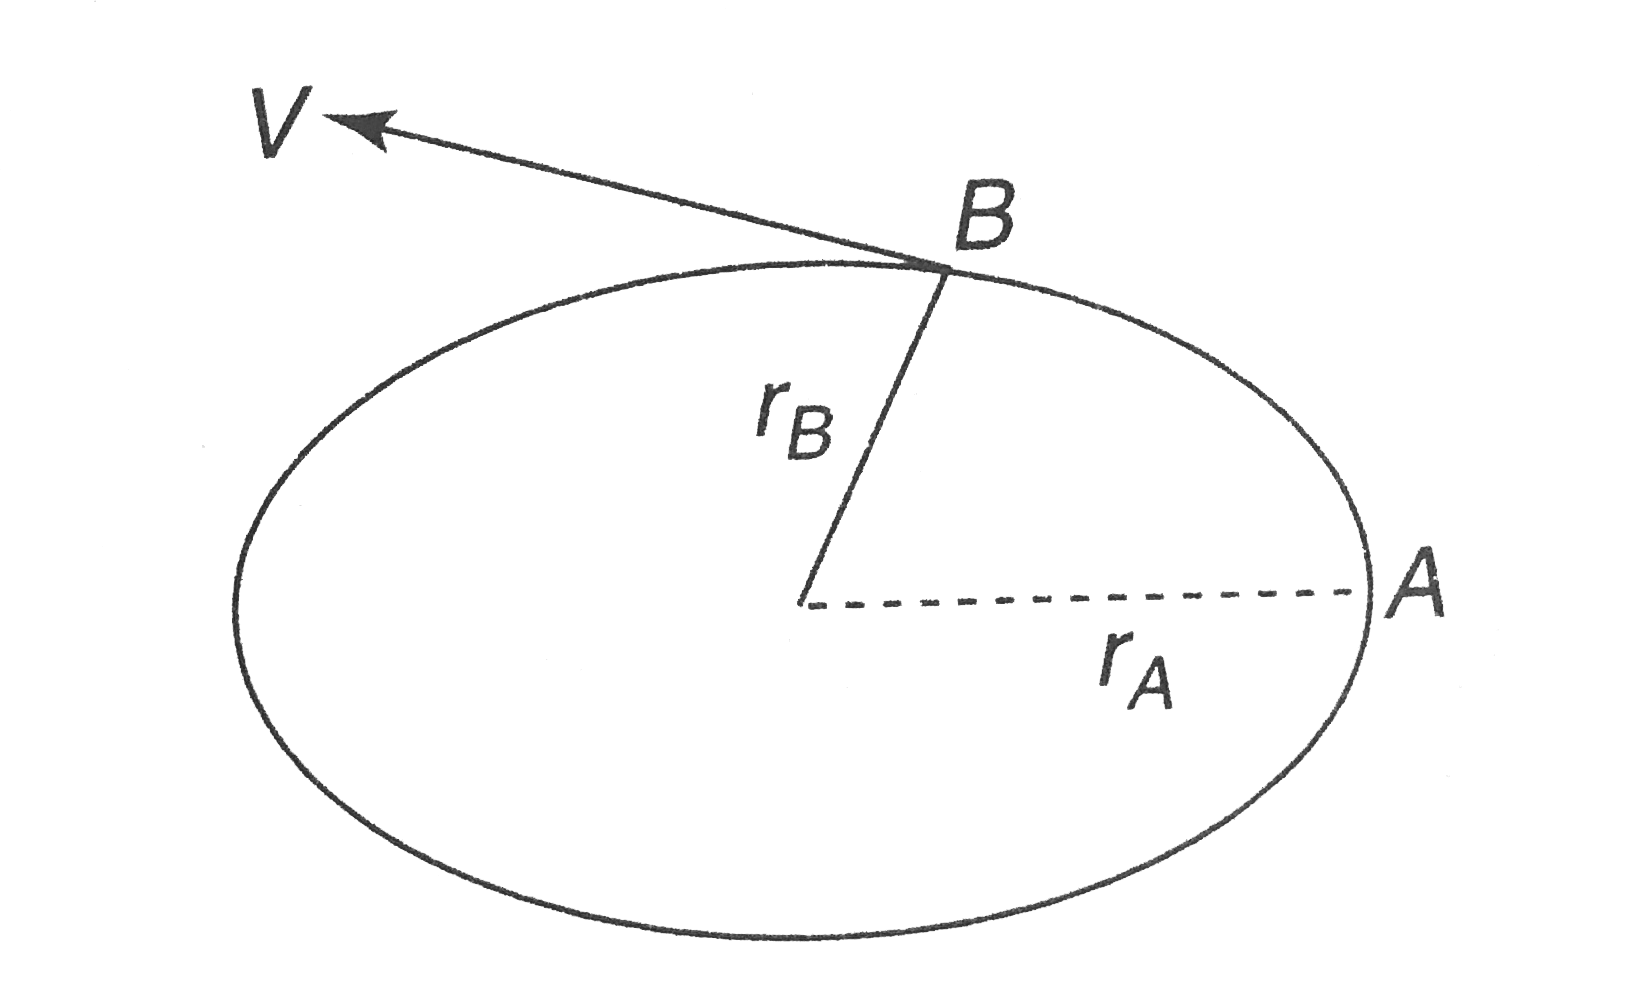 The orbital velocity of a satellite at point B with radius r(B) is  v. The radius of a point A is r(A). If the orbit is increased in radial distance so that r(A) becomes 1.2r(A) find the orbital velocity at (1.2 r(A)):